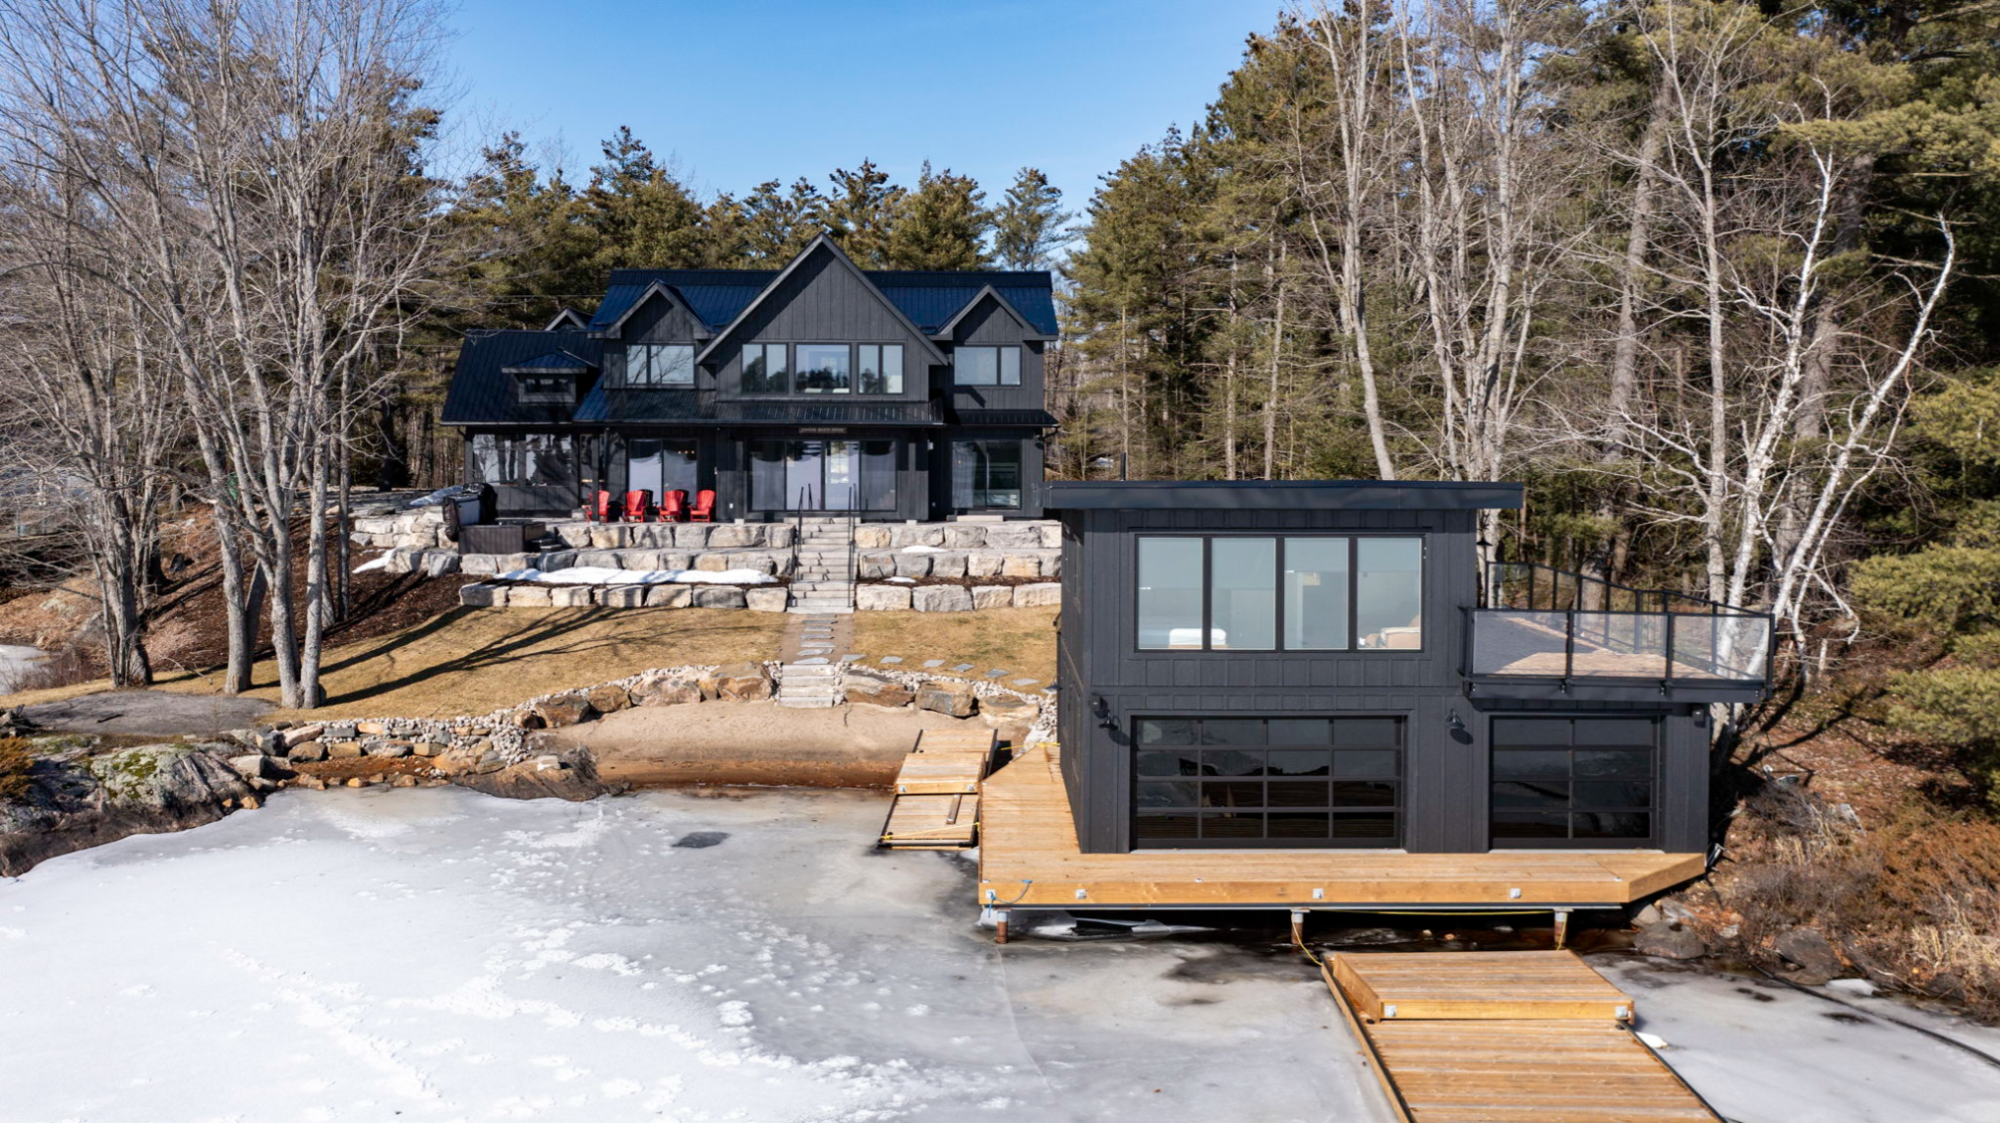 The main home faces west and comes with a two-storey boathouse.